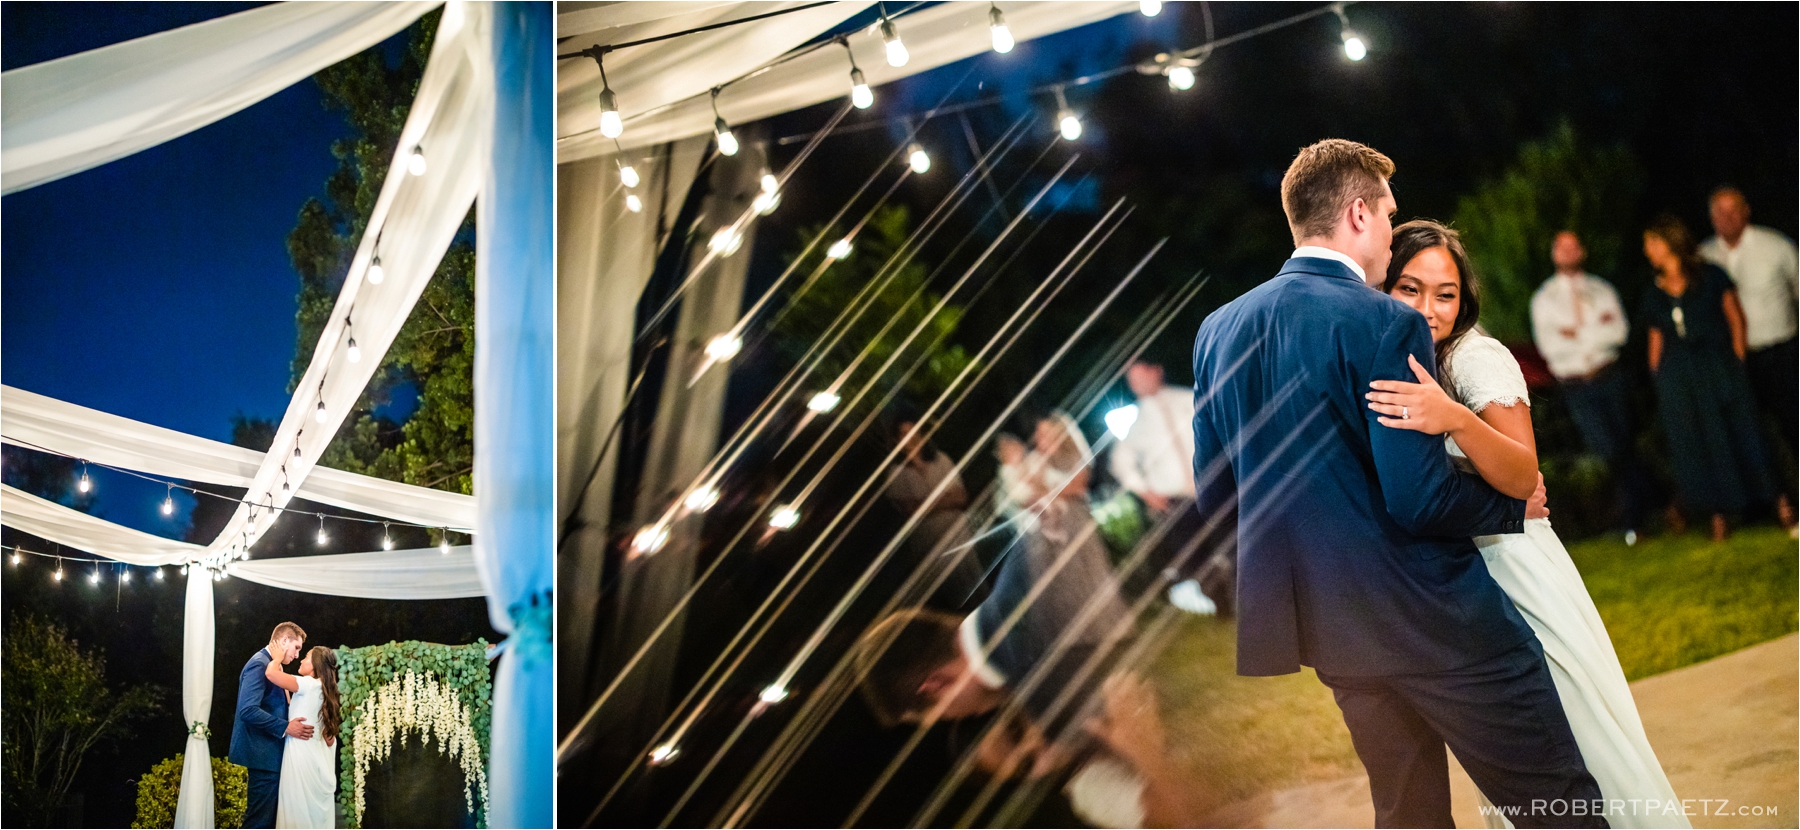 A backyard, social distanced, Zoom wedding in Arcadia, California, during the Covid-19 pandemic photographed by the destination wedding photographer, Robert Paetz.